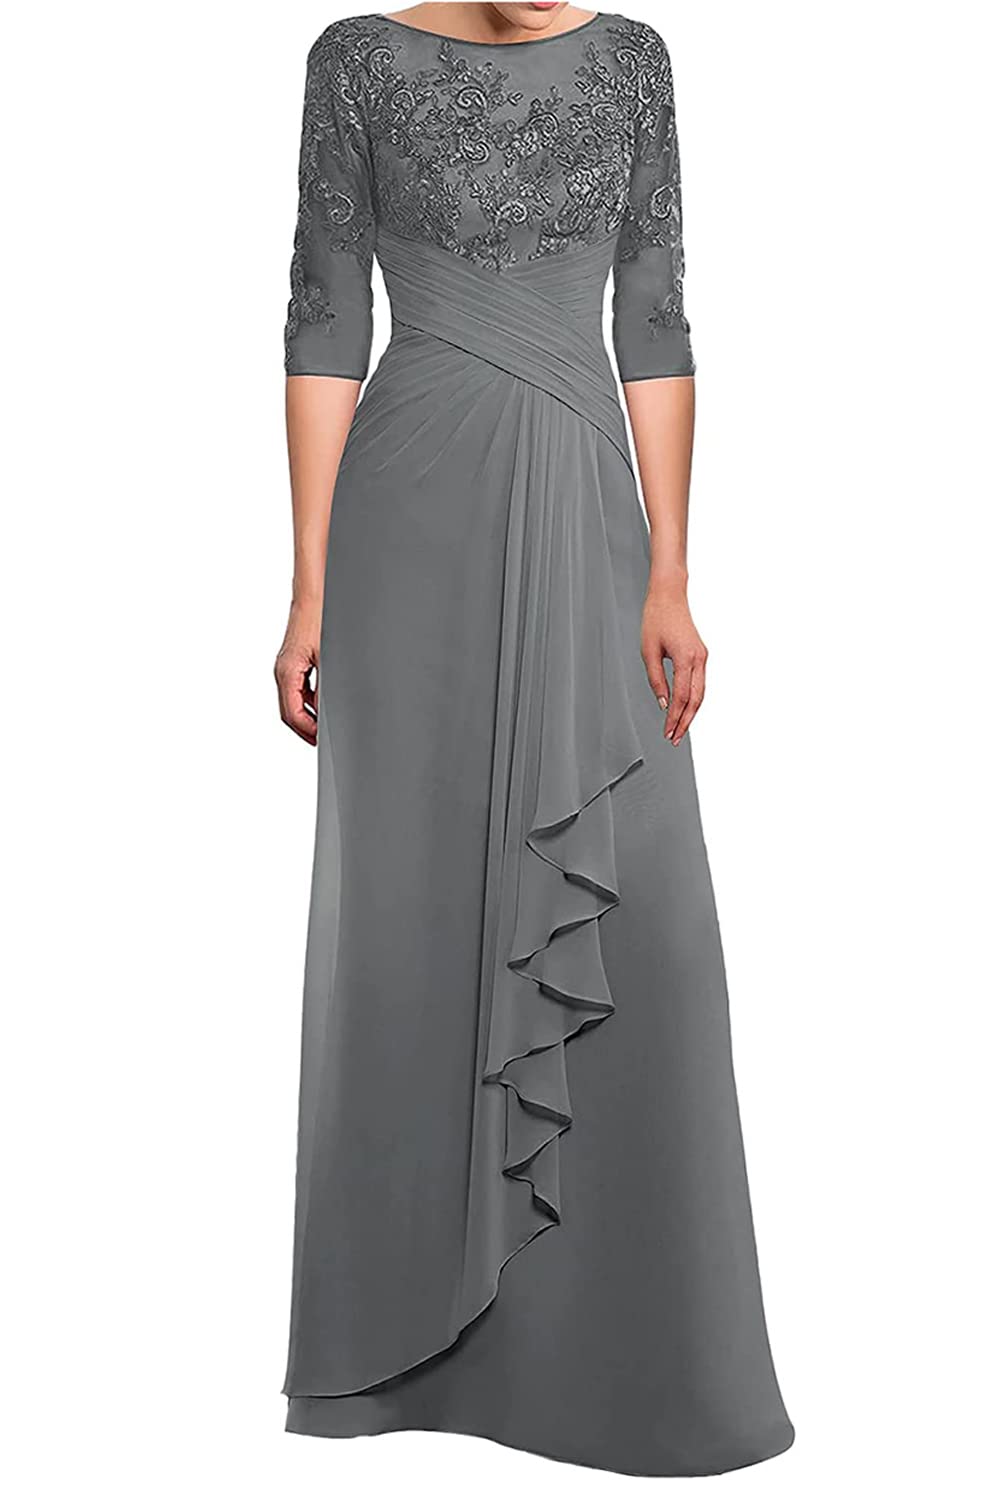 Women's 3/4 Sleeve Mother of The Bride Dresses for Wedding Lace Applique Formal Evening Gown